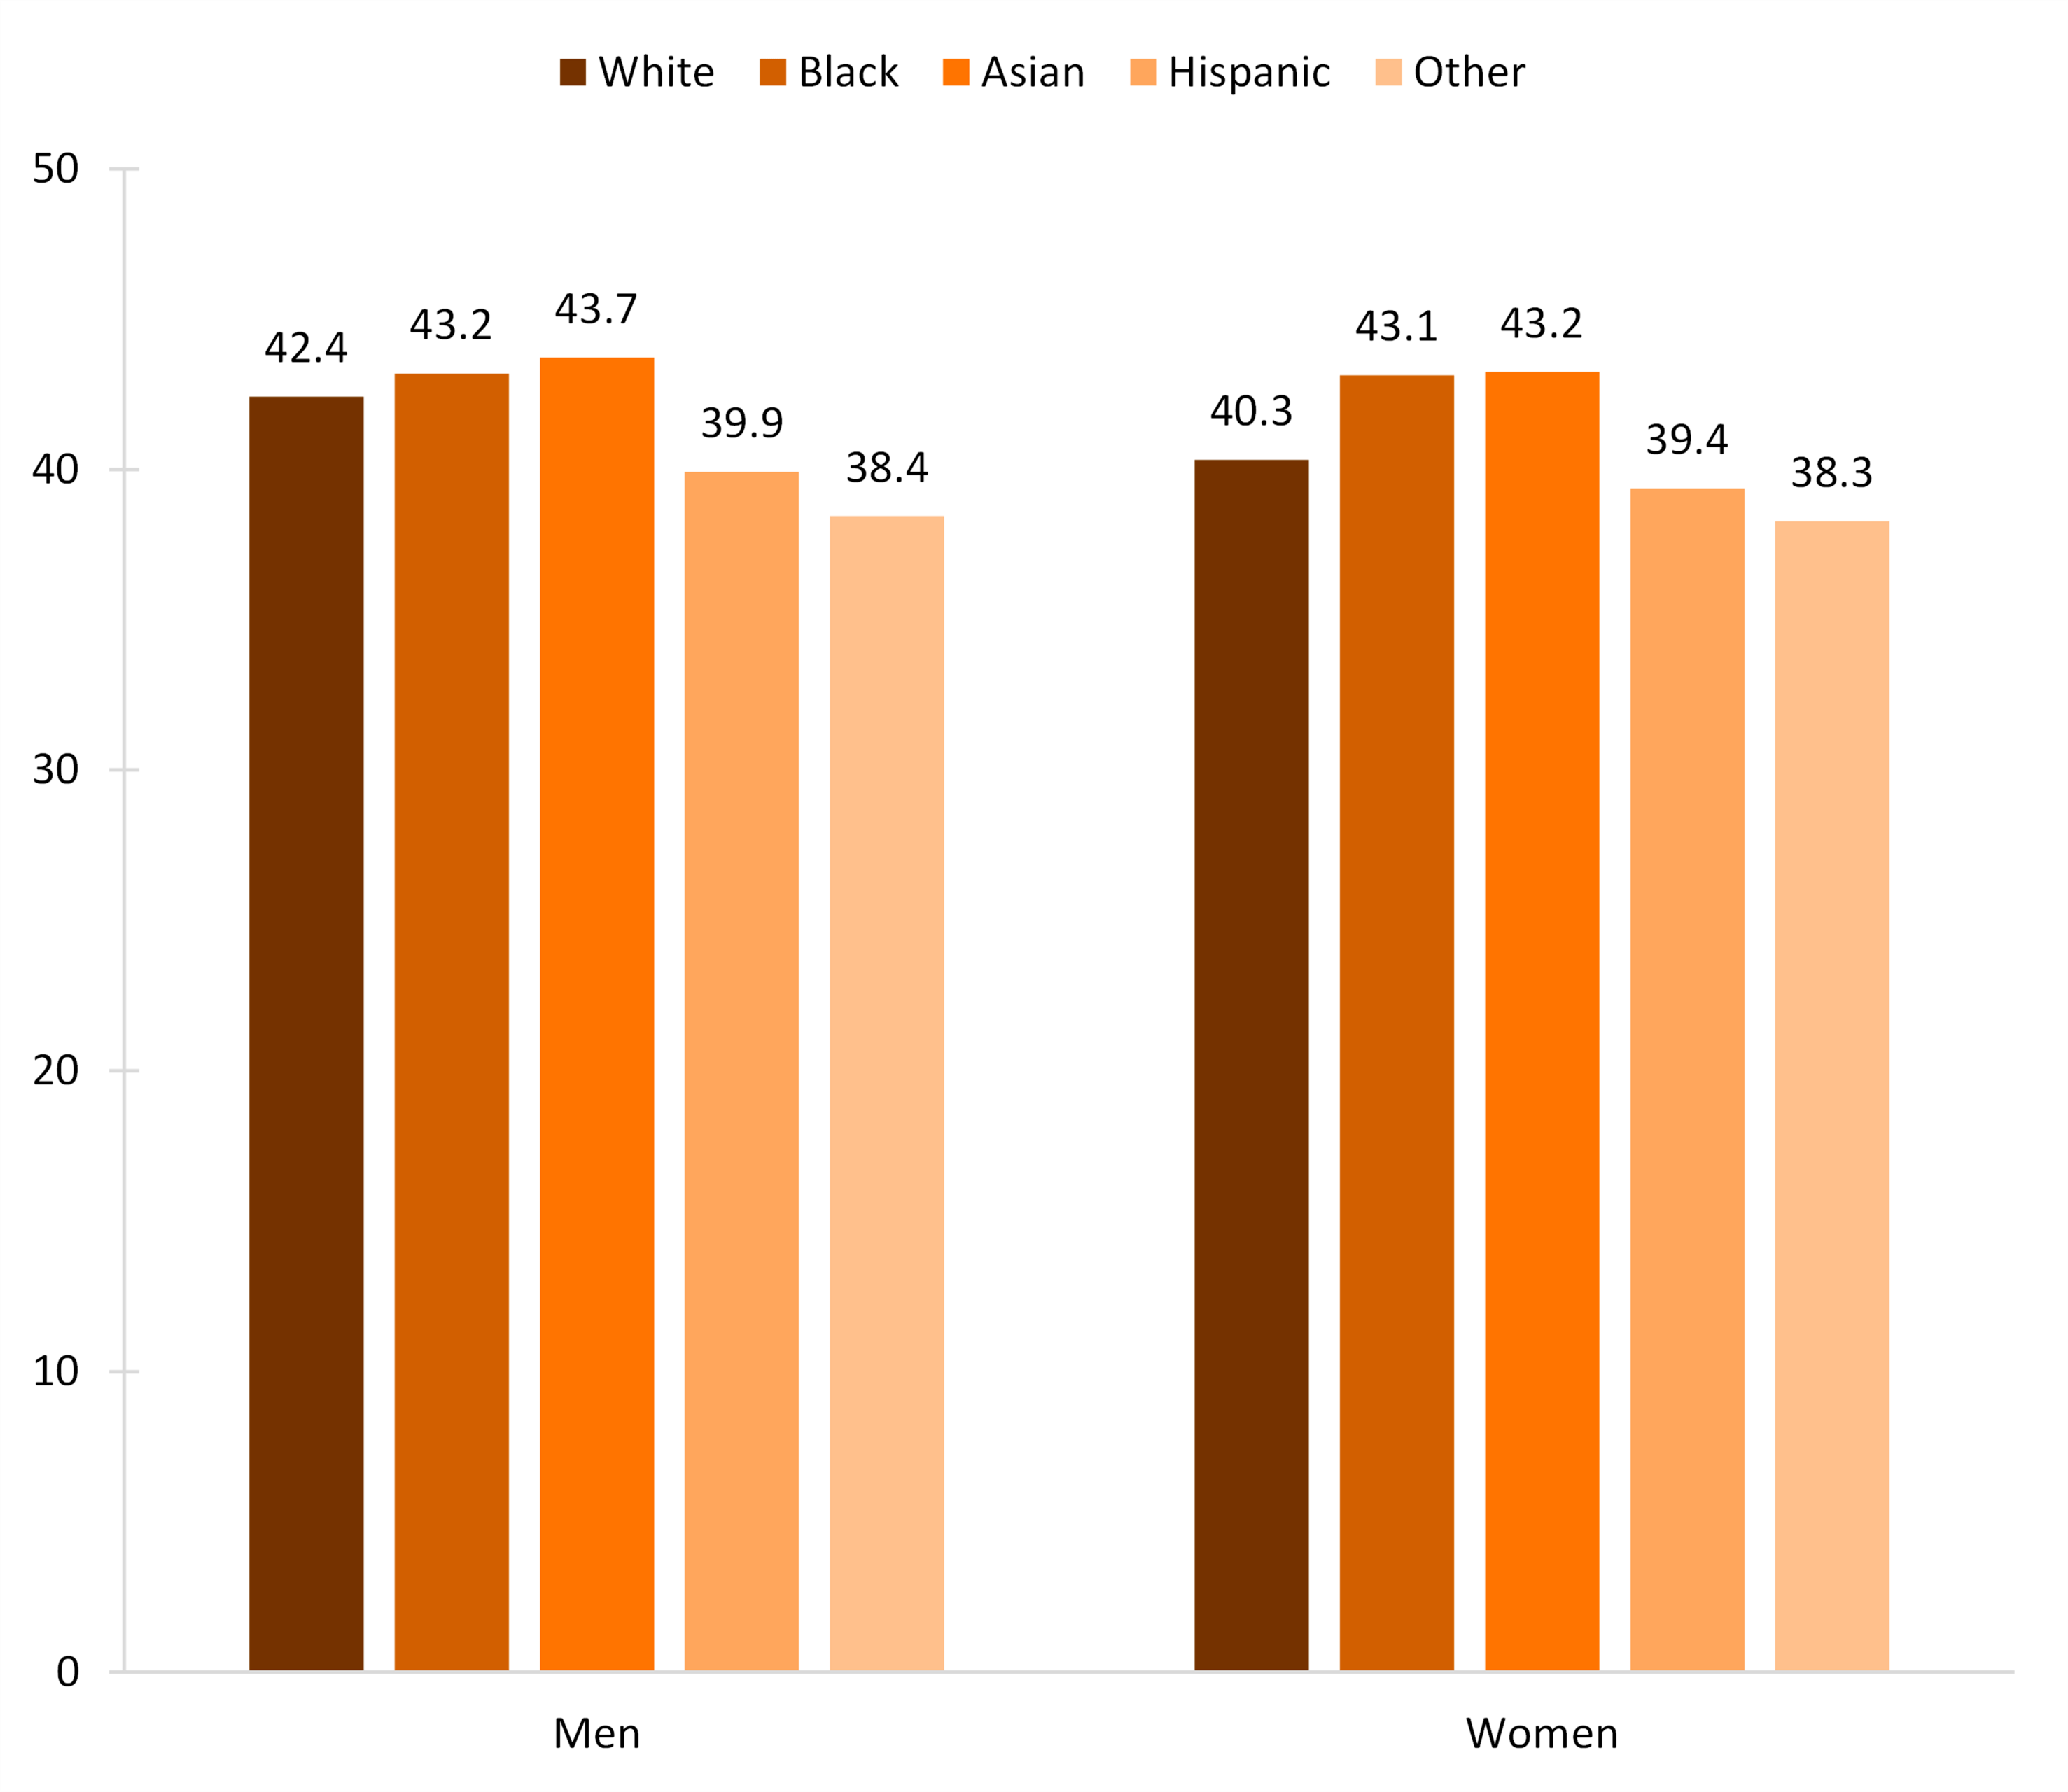   Figure 2. Median Age at First Divorce by Race/Ethnicity, 2018